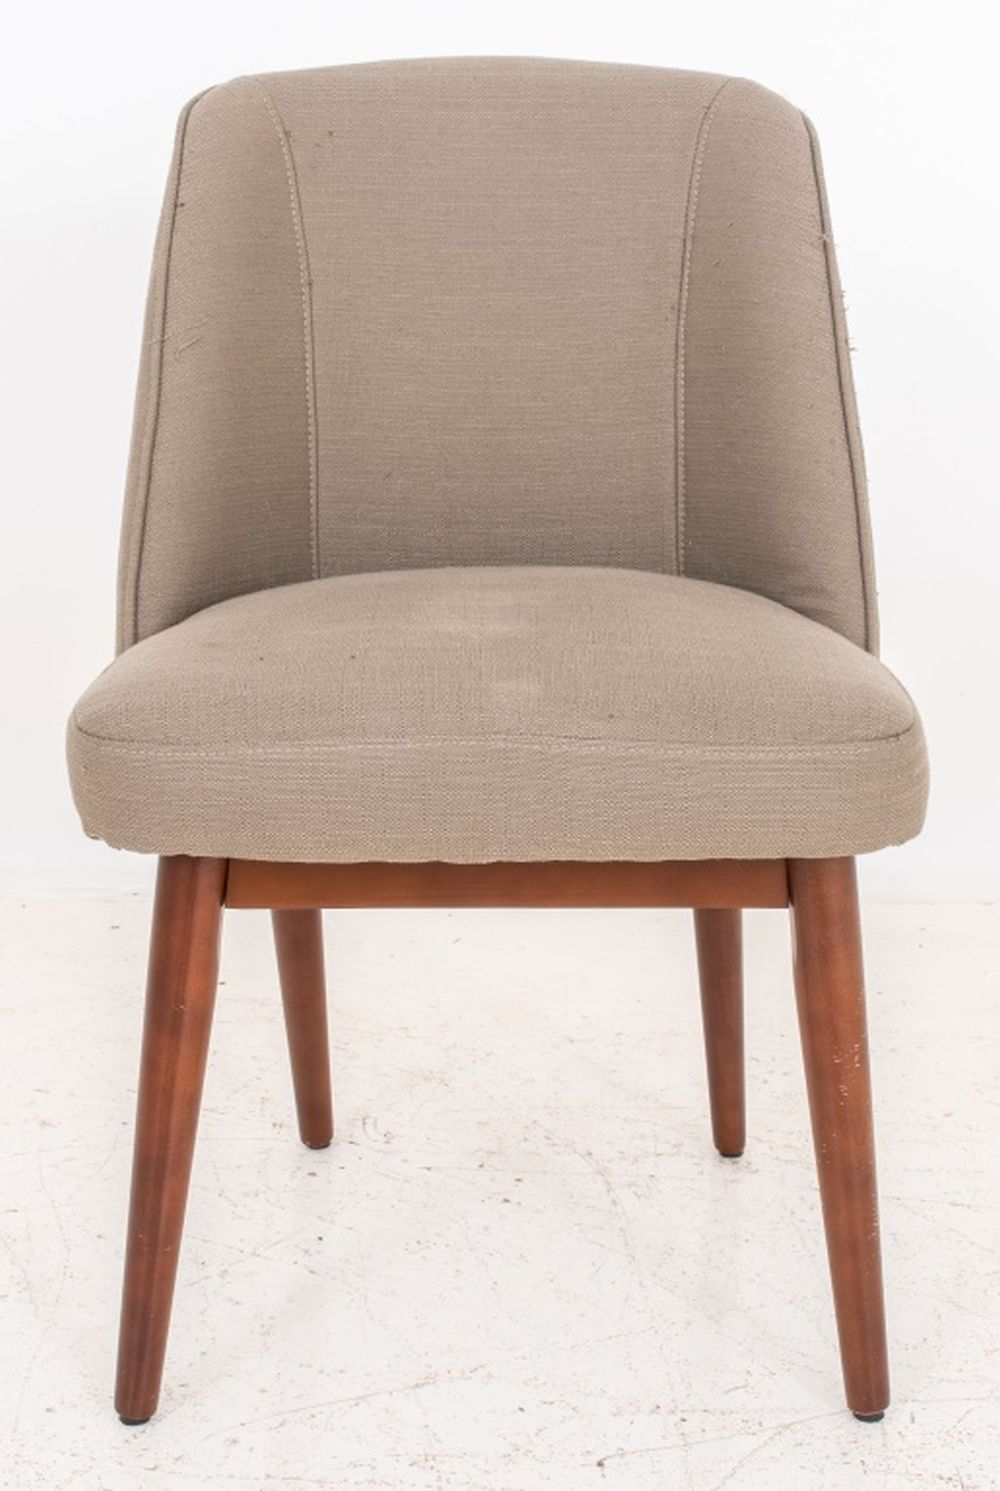 MODERN UPHOLSTERED BEIGE CHAIR 2bc430